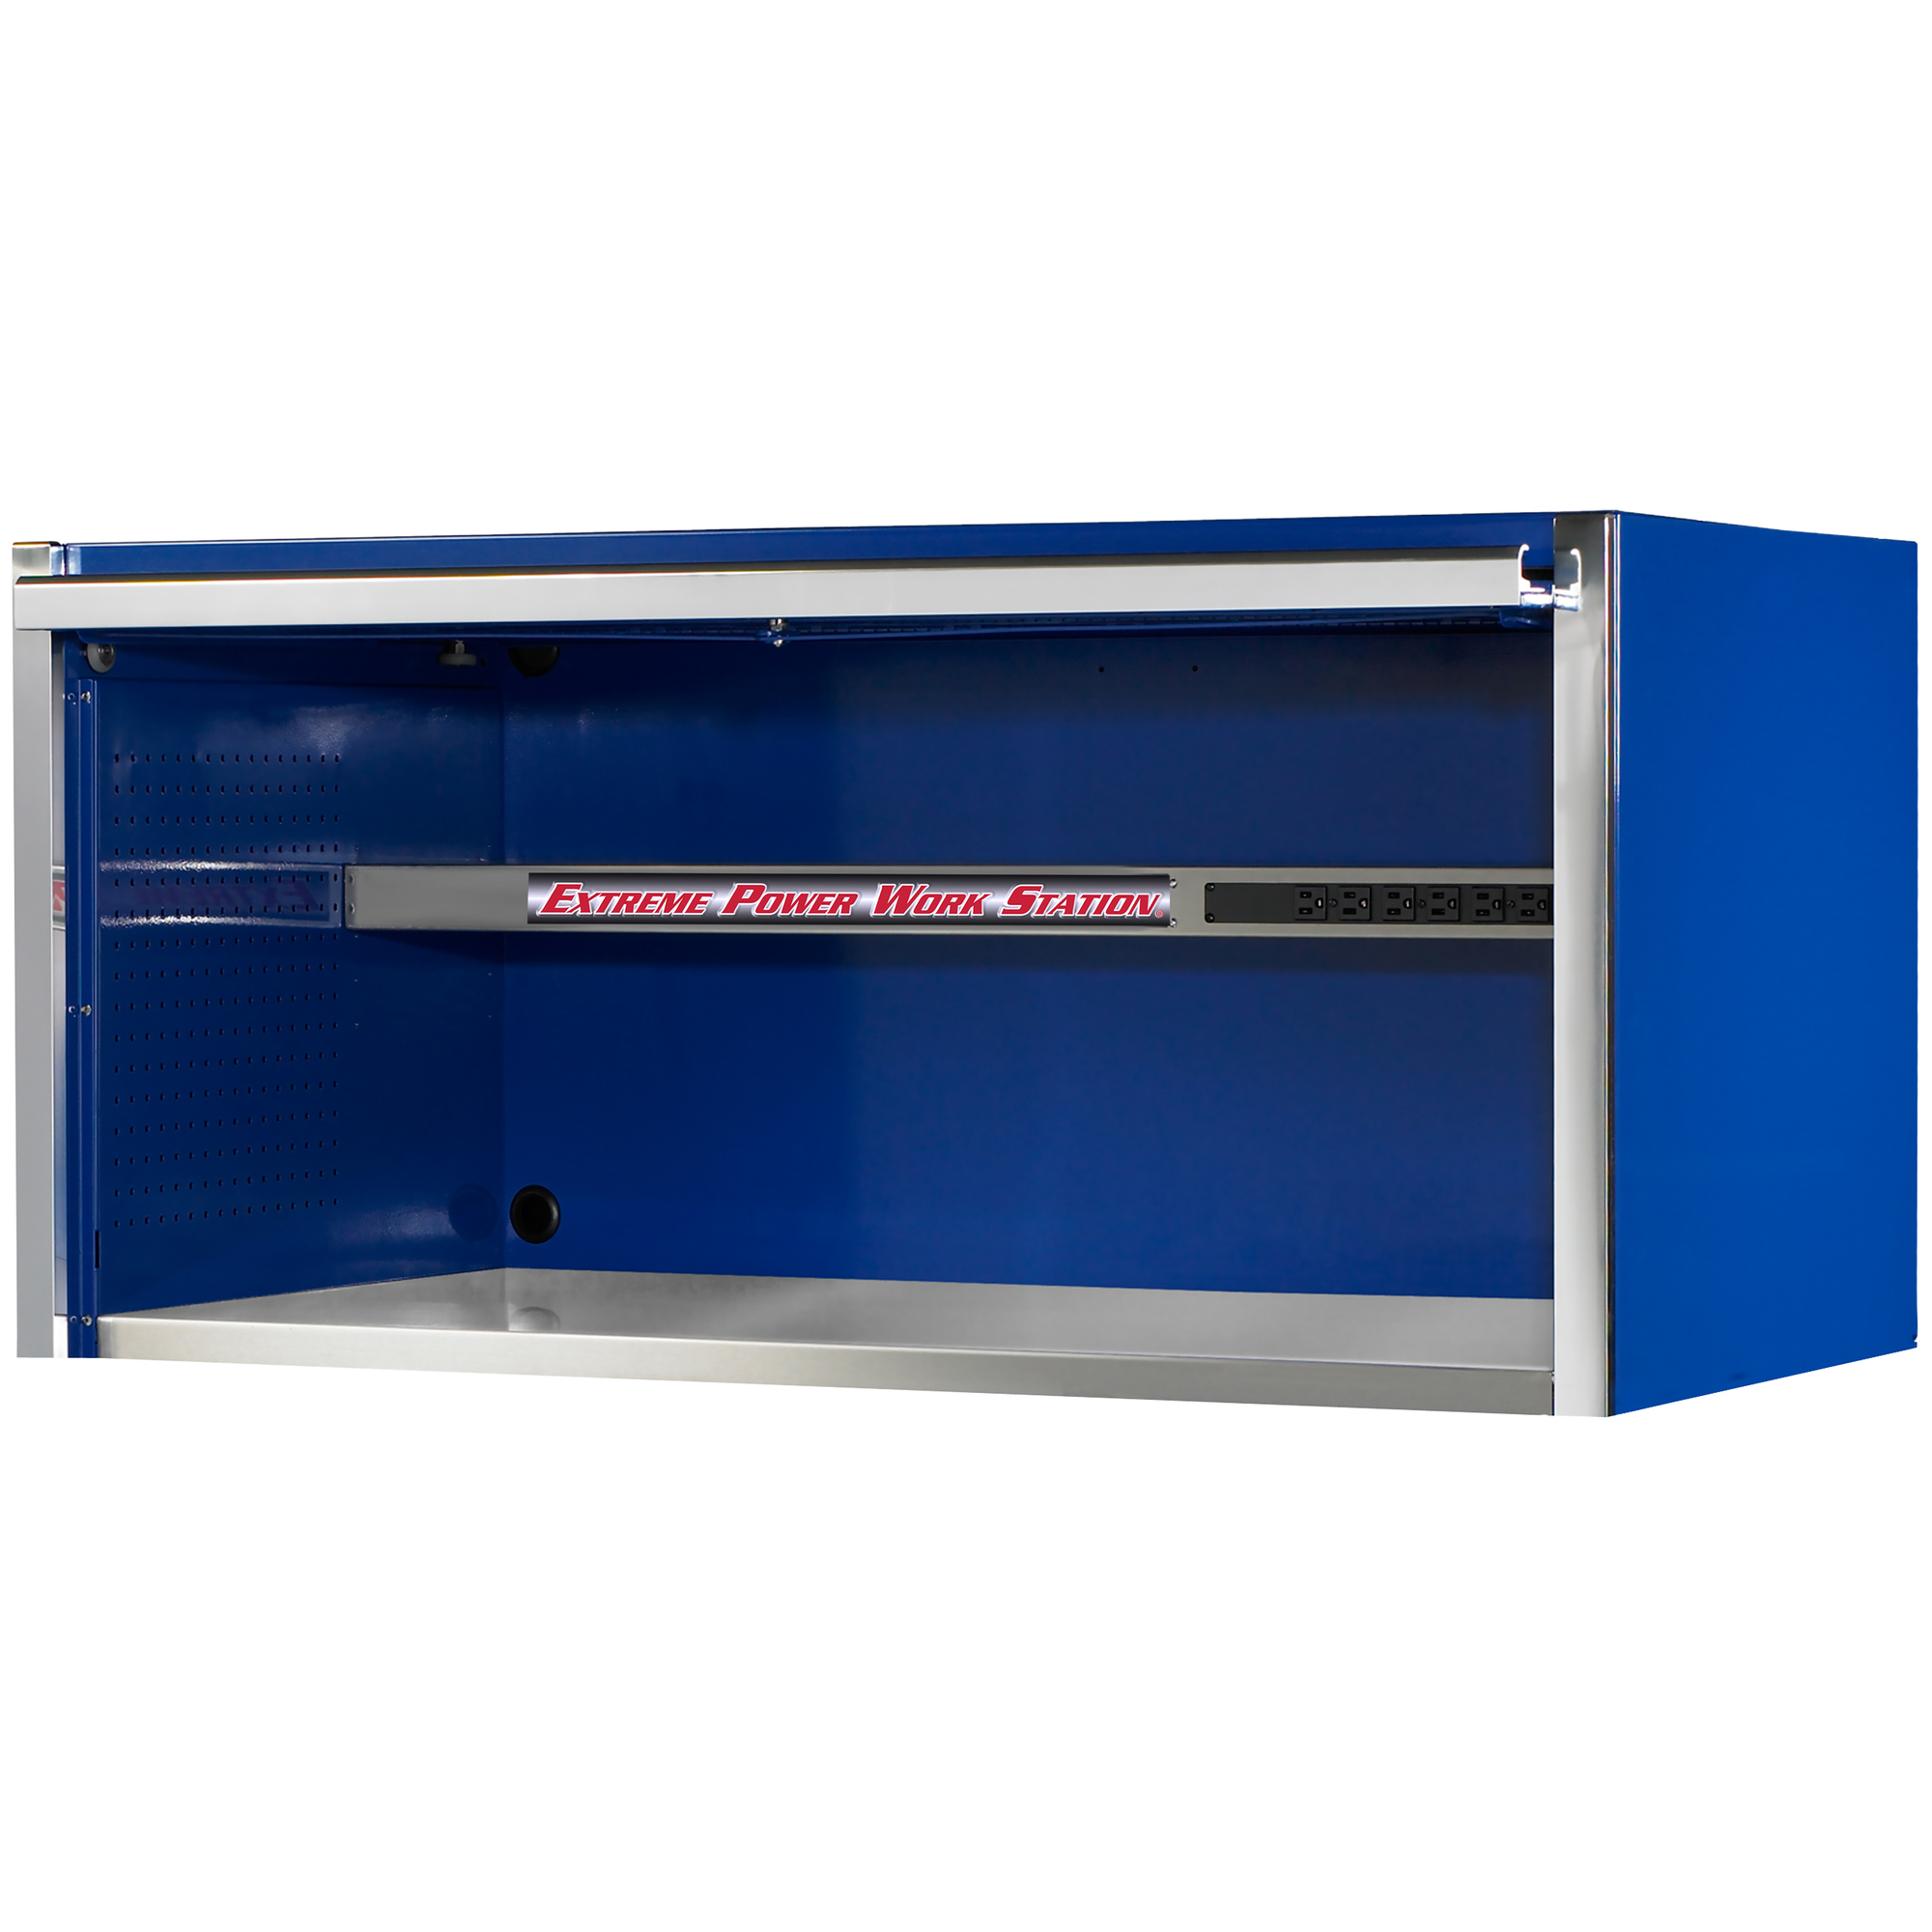 Extreme Tools, EX Pro Power Workstation Hutch, 55Inch x 30Inch, BLCR, Width 55 in, Height 26.375 in, Color Blue, Model EX5501HCQBLCR